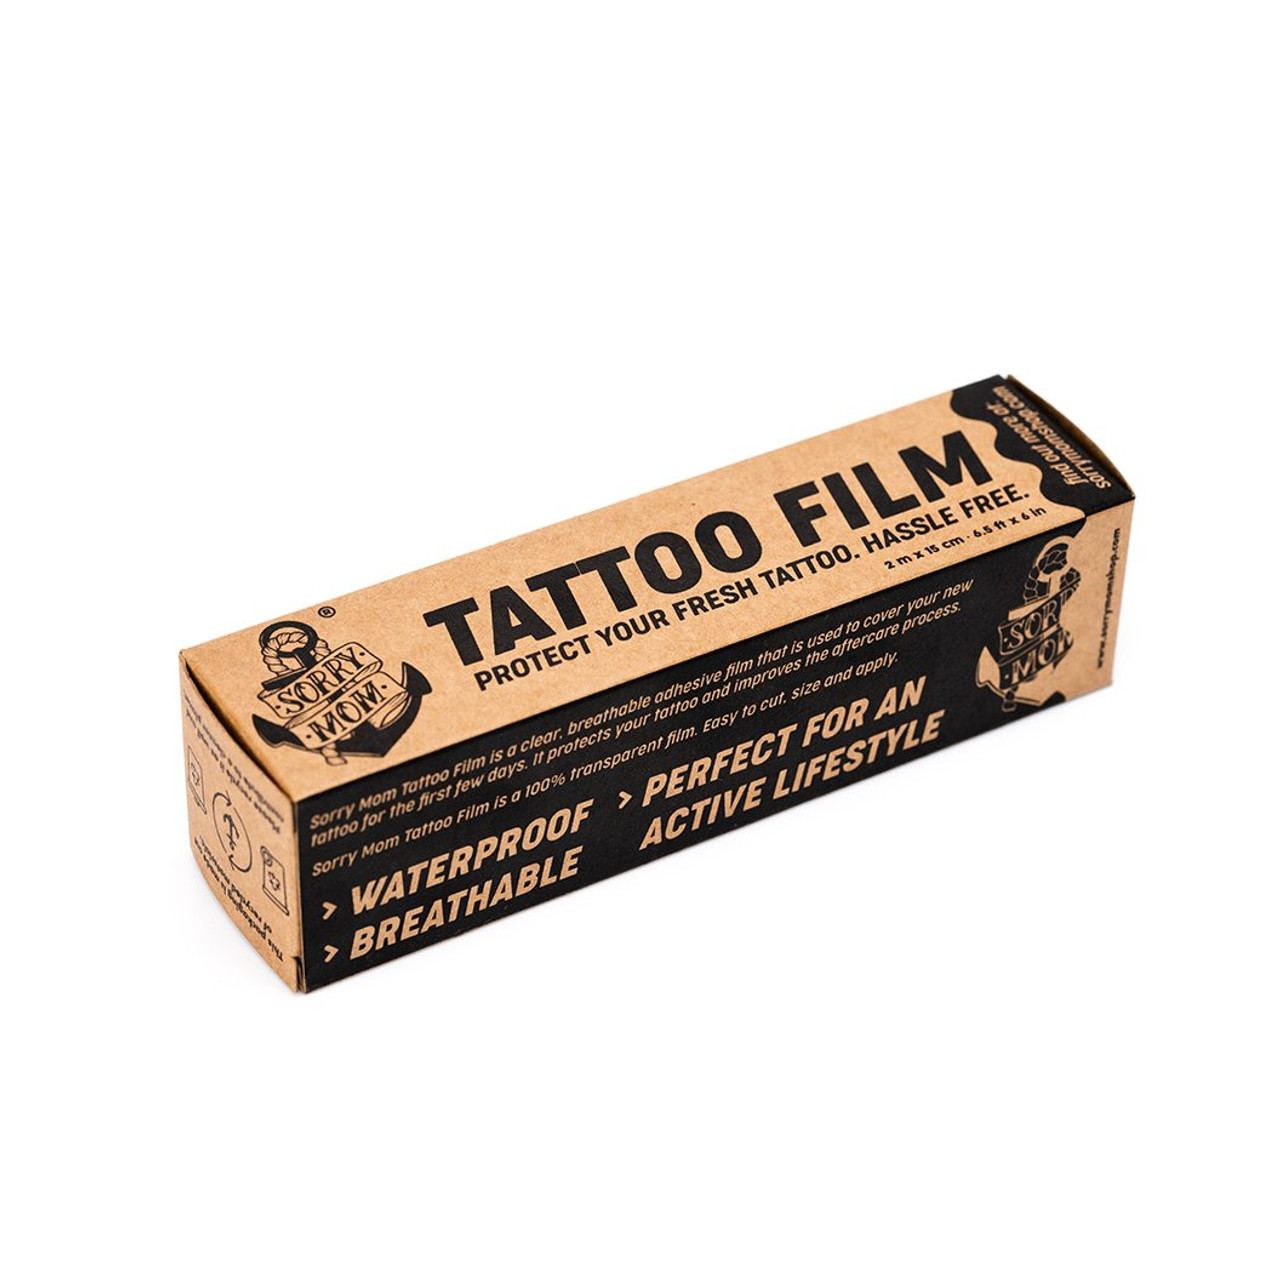 Professional Tattoo Stencil Application in 5 Easy Steps - Sorry Mom, Tattoo  Aftercare